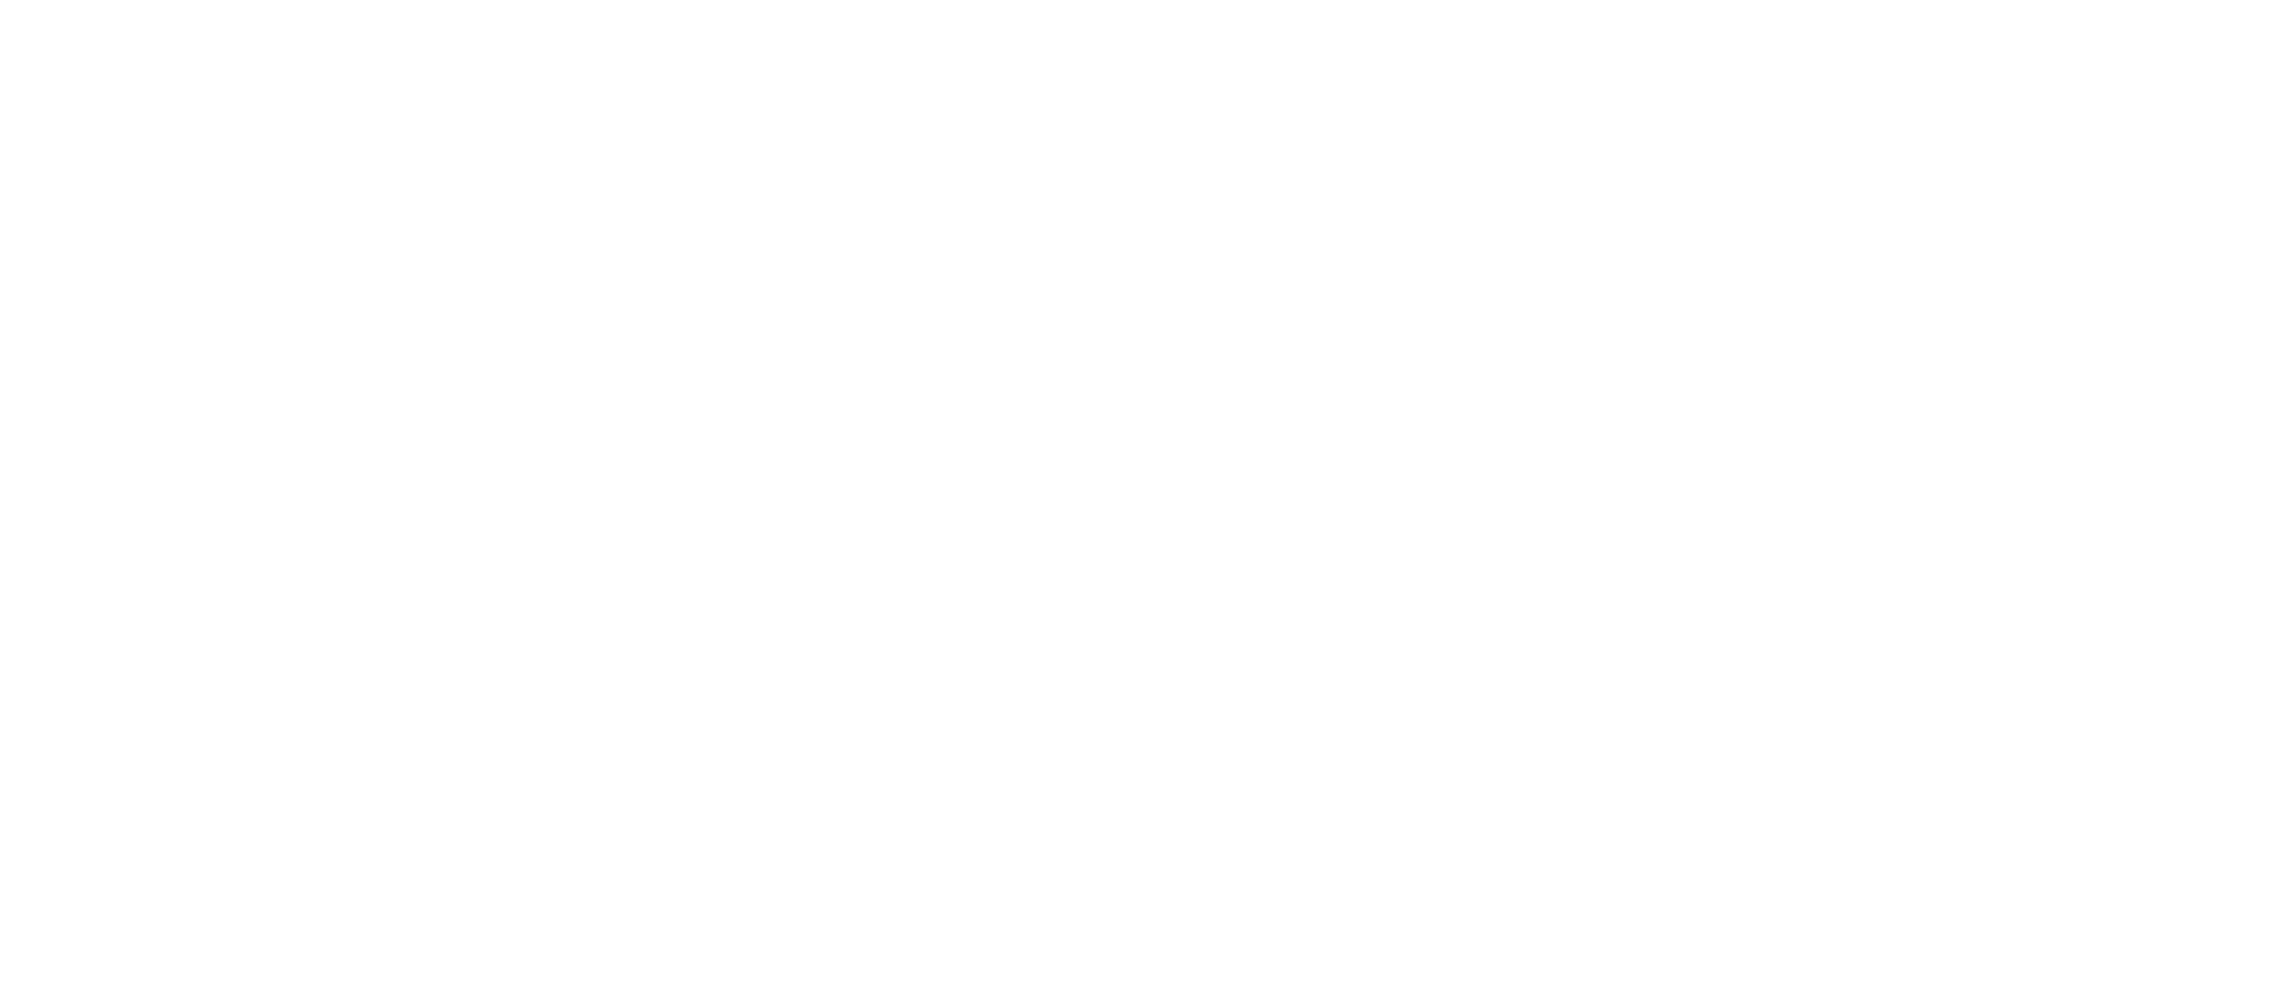 St. Marcos